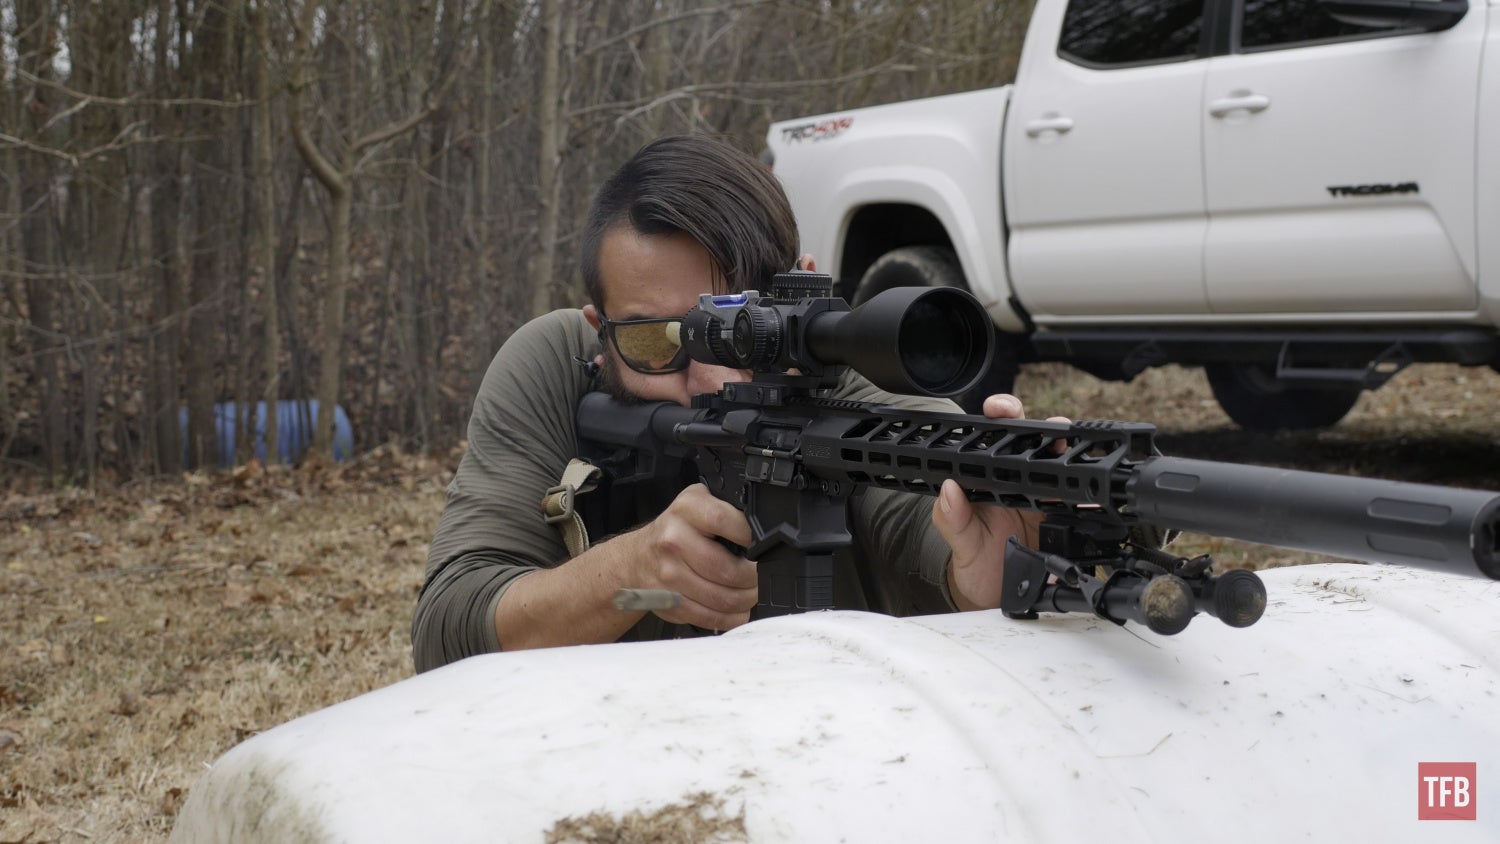 TFB REVIEW: The Ruger SFAR - An Almost Perfect Small Frame AR-10